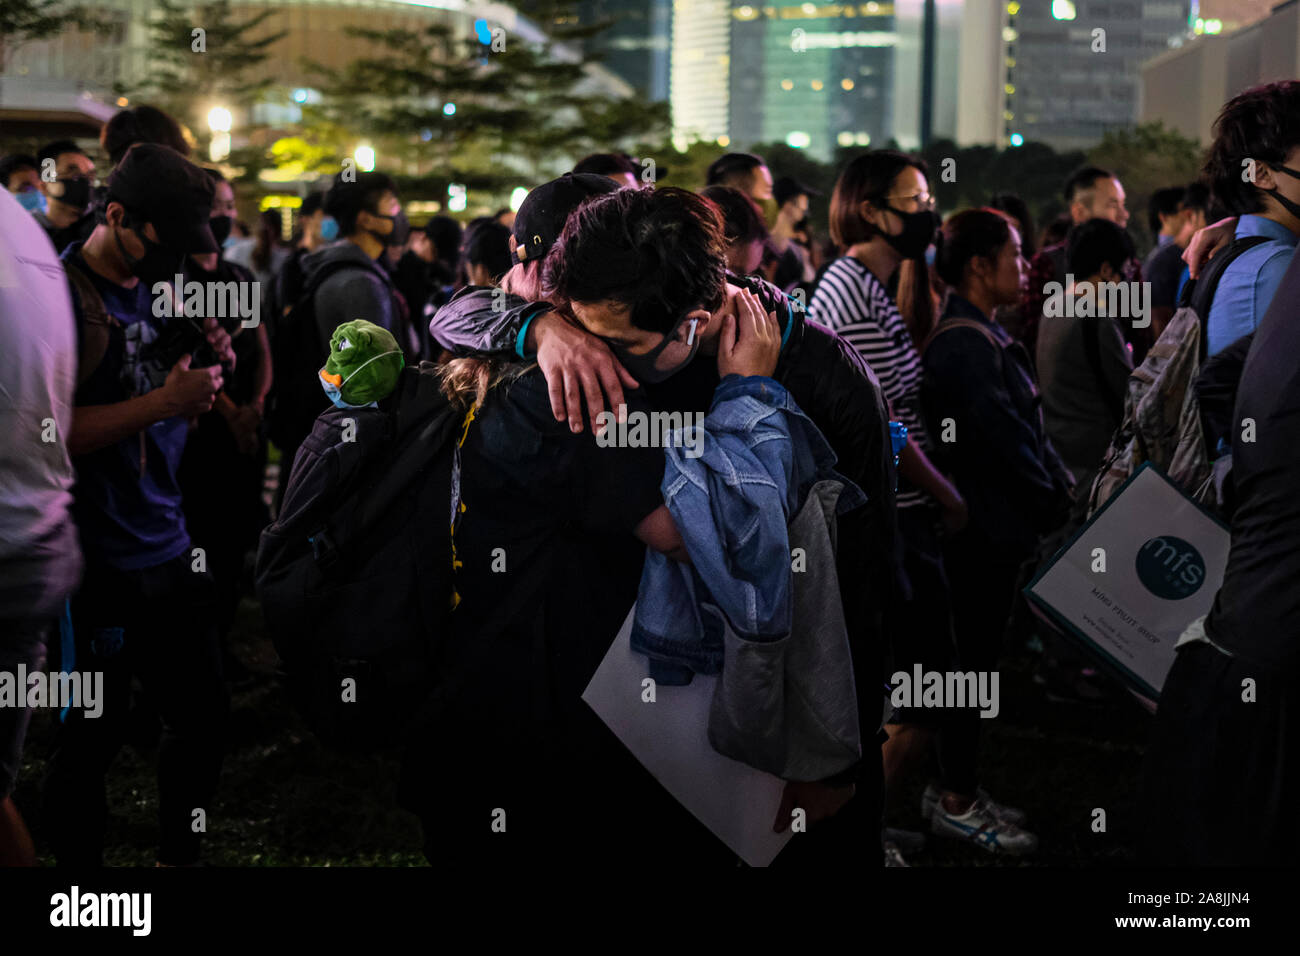 Demonstrators hug each other during the rally.Memorial rally at Tamar Park in Hong Kong to mourn the death of a 22 years old university student, Alex Chow Tsz Lok who died from a serious brain injury during a fall on November 4th as police skirmished with demonstrators last weekend. He was left in critical condition and died after suffering a cardiac arrest. Stock Photo